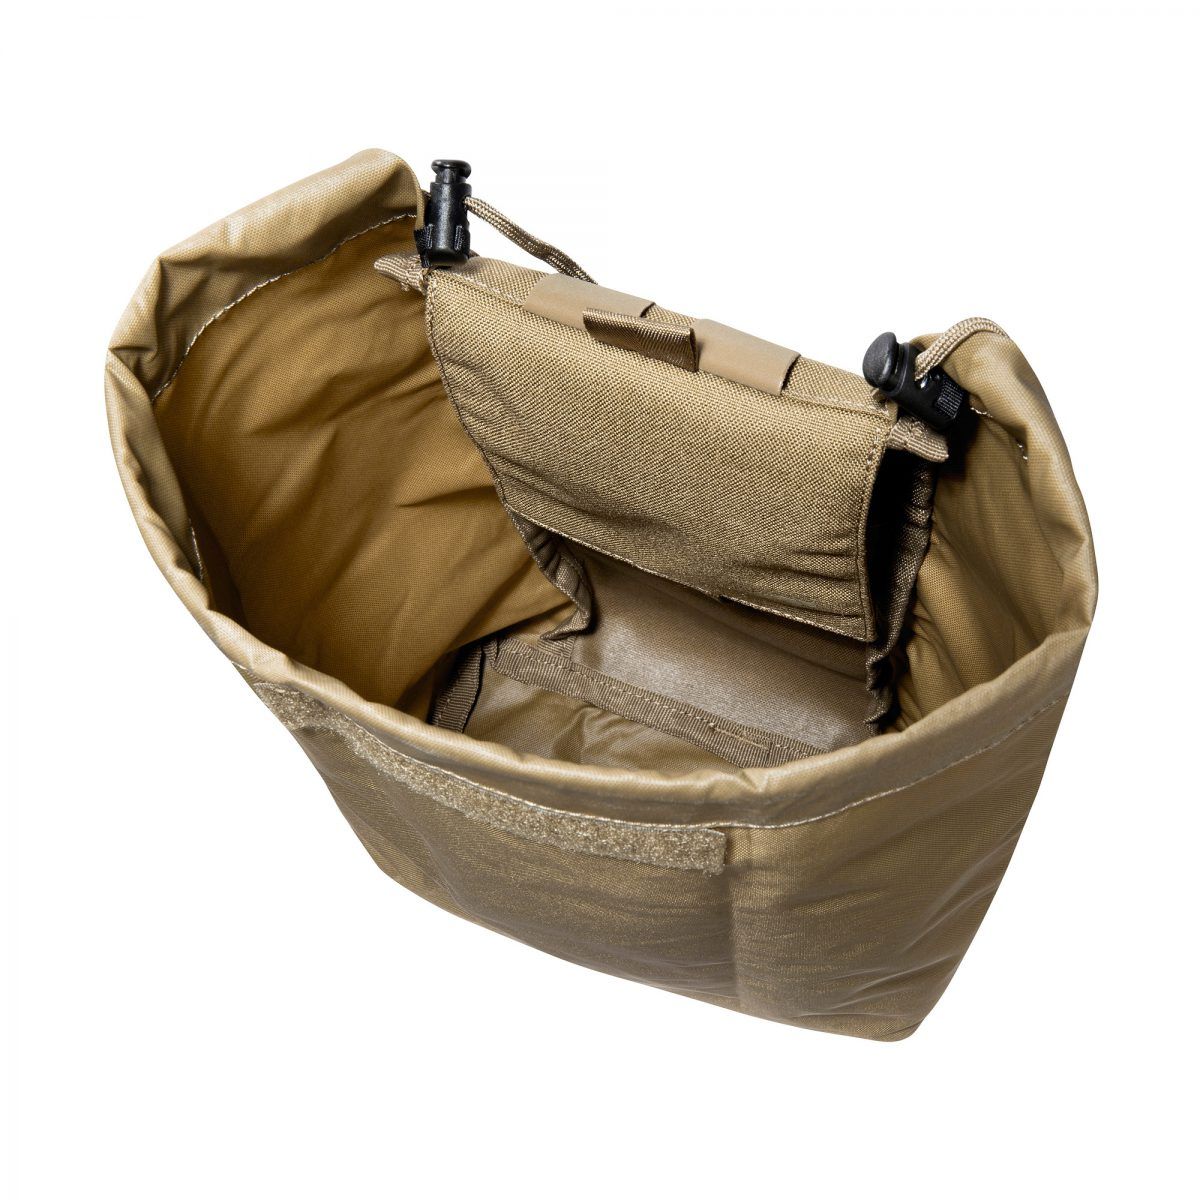 Tasmanian Tiger - Dump Pouch MKII - Coyote Brown